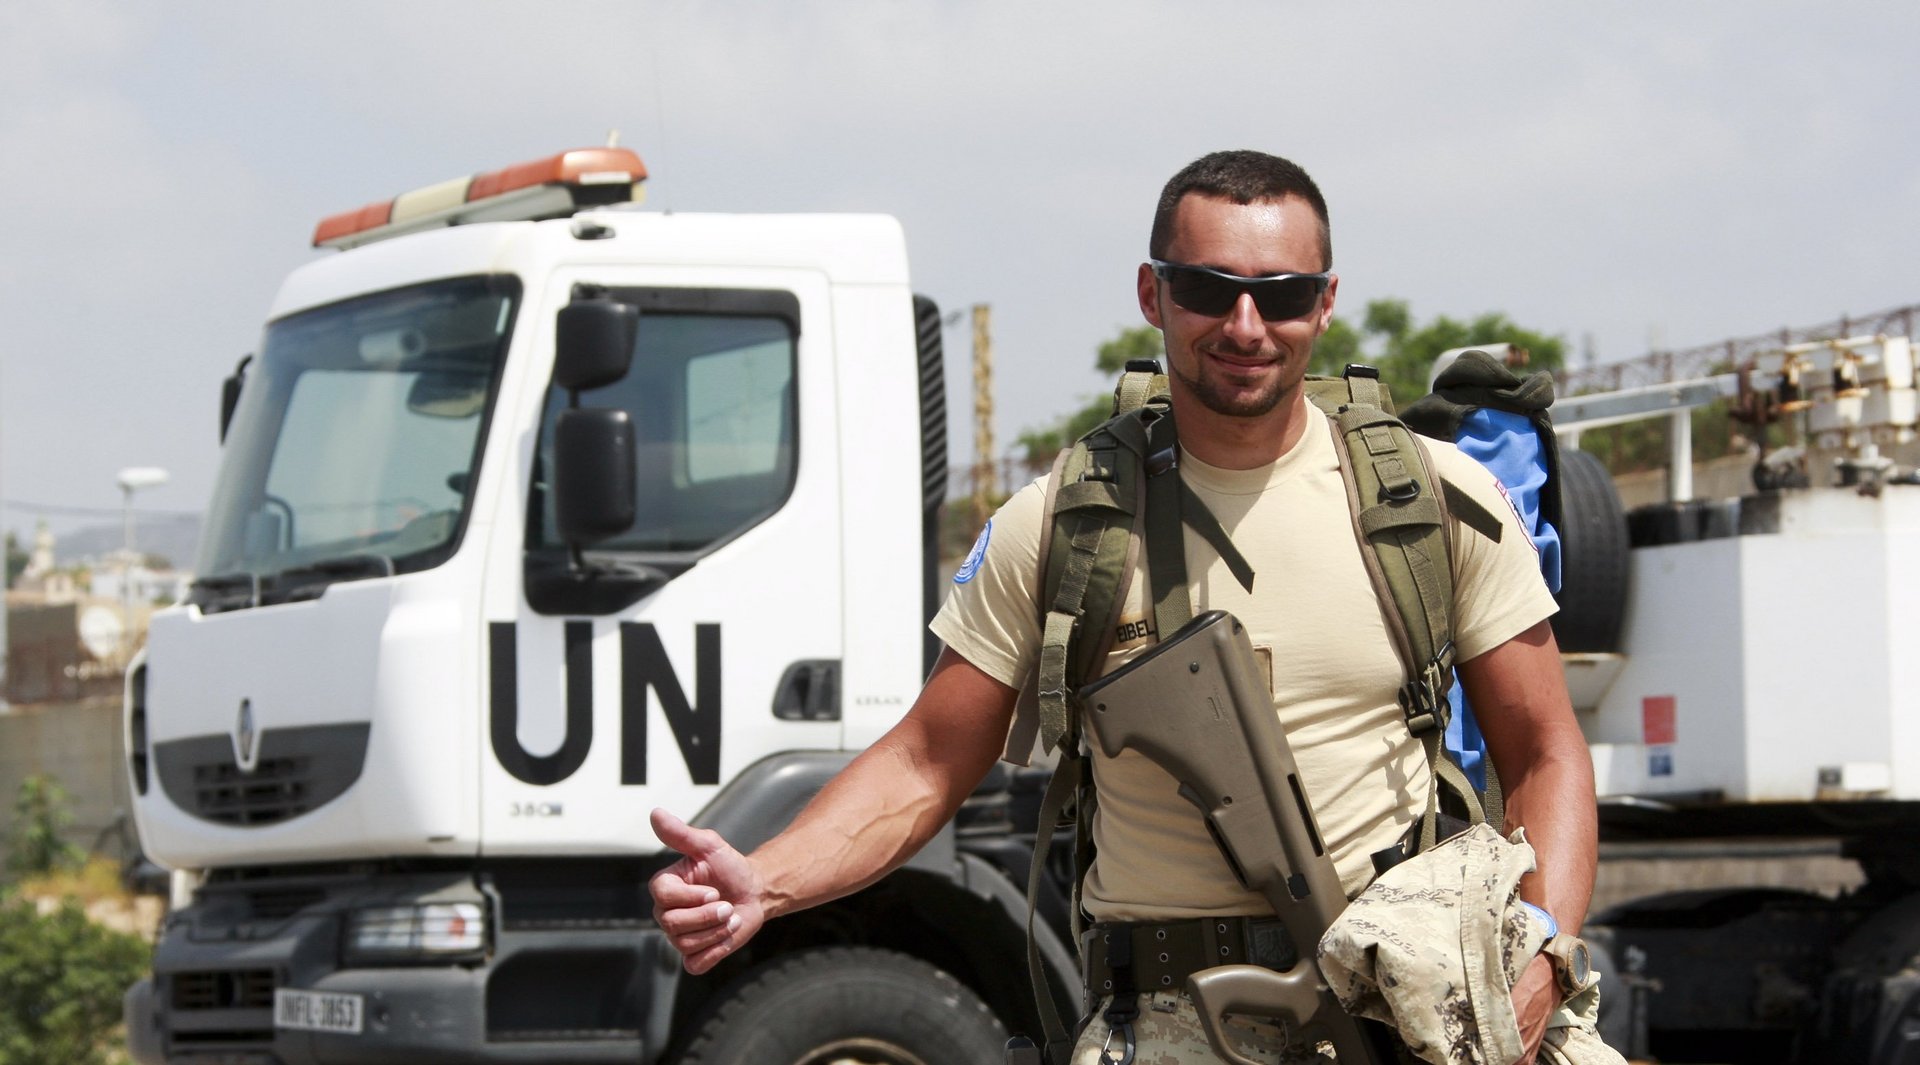 An Austrian United Nations soldier in Lebanon.